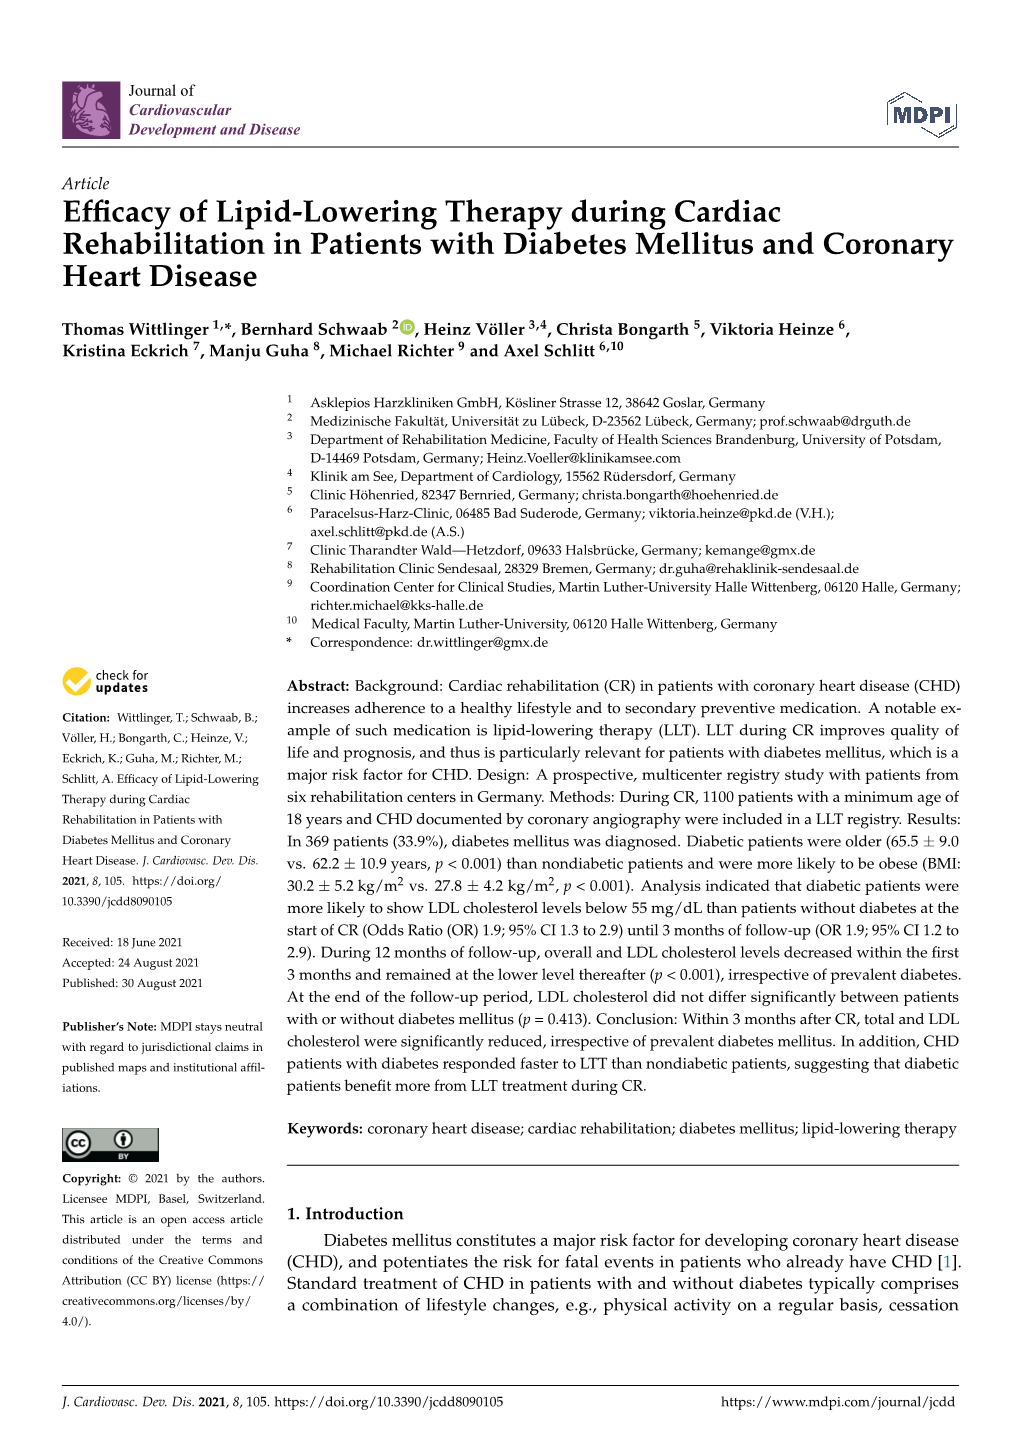 Efficacy of Lipid-Lowering Therapy During Cardiac Rehabilitation in Patients with Diabetes Mellitus and Coronary Heart Disease